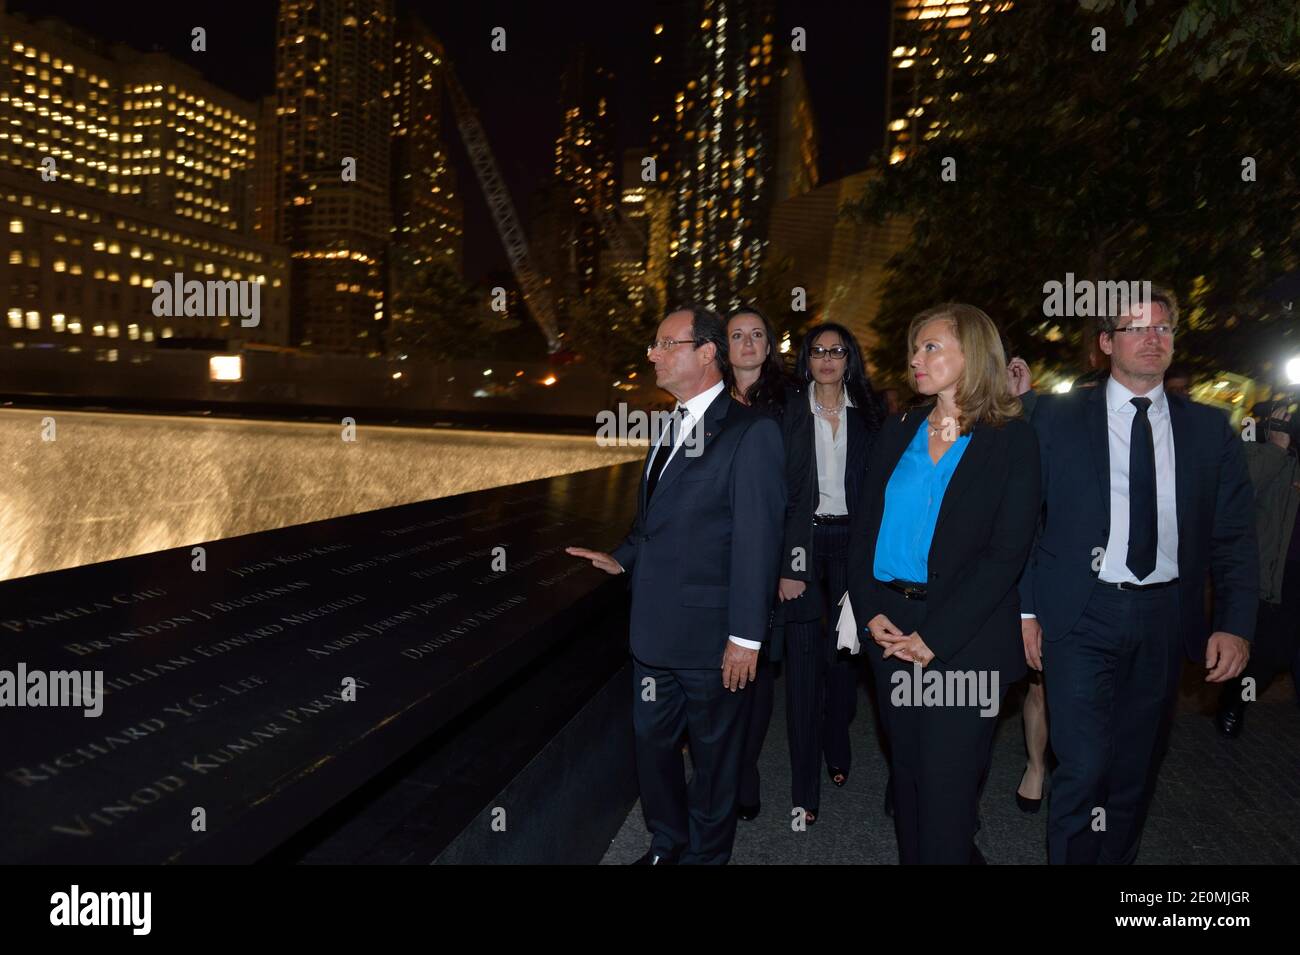 French President Francois Hollande, his companion Valerie Trierweiler and French Junior Minister for Foreign Countries and Development Pascal Canfin visit Ground Zero in New York, NY, US on September 25, 2012 the site of the Twin Towers that were destroyed on September 11, 2001. Photo by Eric Feferberg/Pool/ABACAPRESS.COM Stock Photo